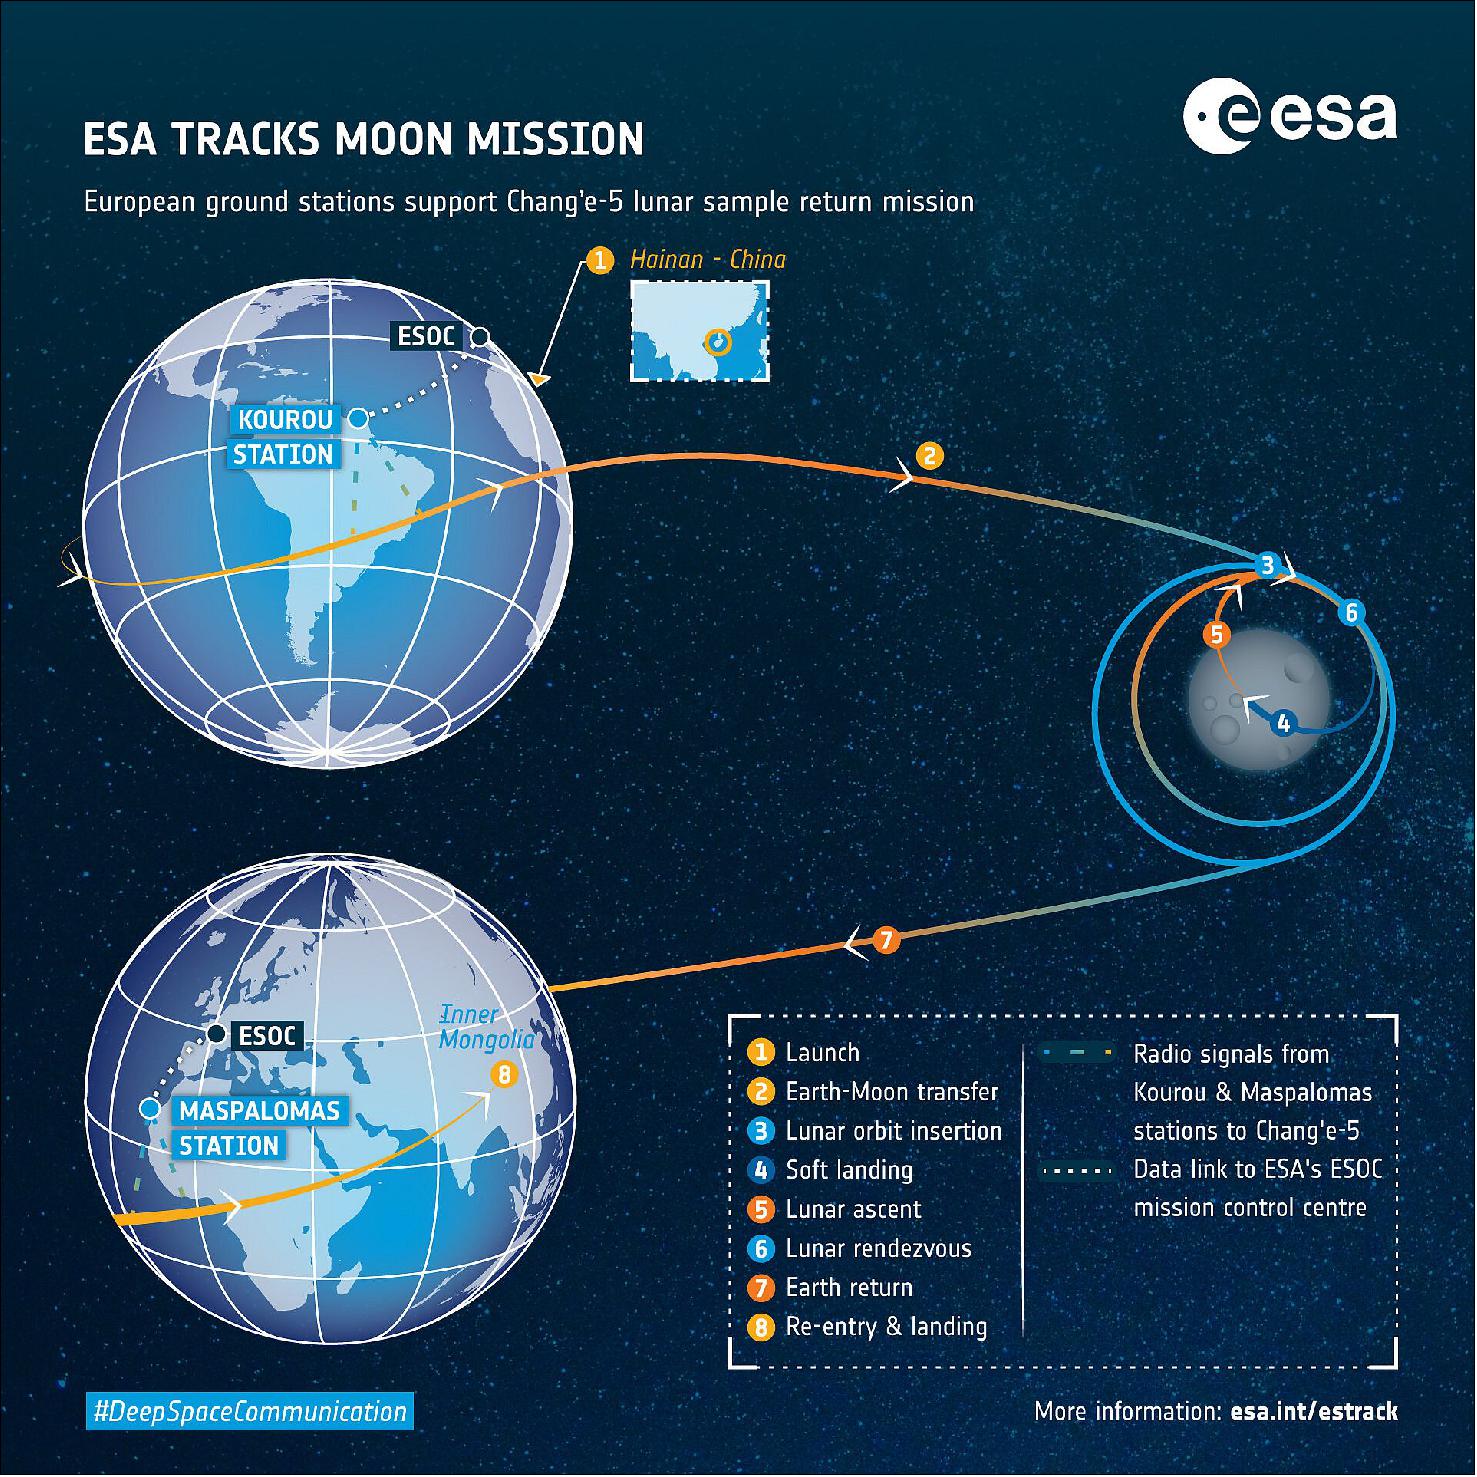 Figure 14: ESA tracks Chang'e-5 Moon mission. Around 15 December, as the spacecraft returns to Earth, ESA will catch signals from the spacecraft using the Maspalomas station, operated by the Instituto Nacional de Tecnica Aerospacial (INTA) in Spain (image credit: ESA)